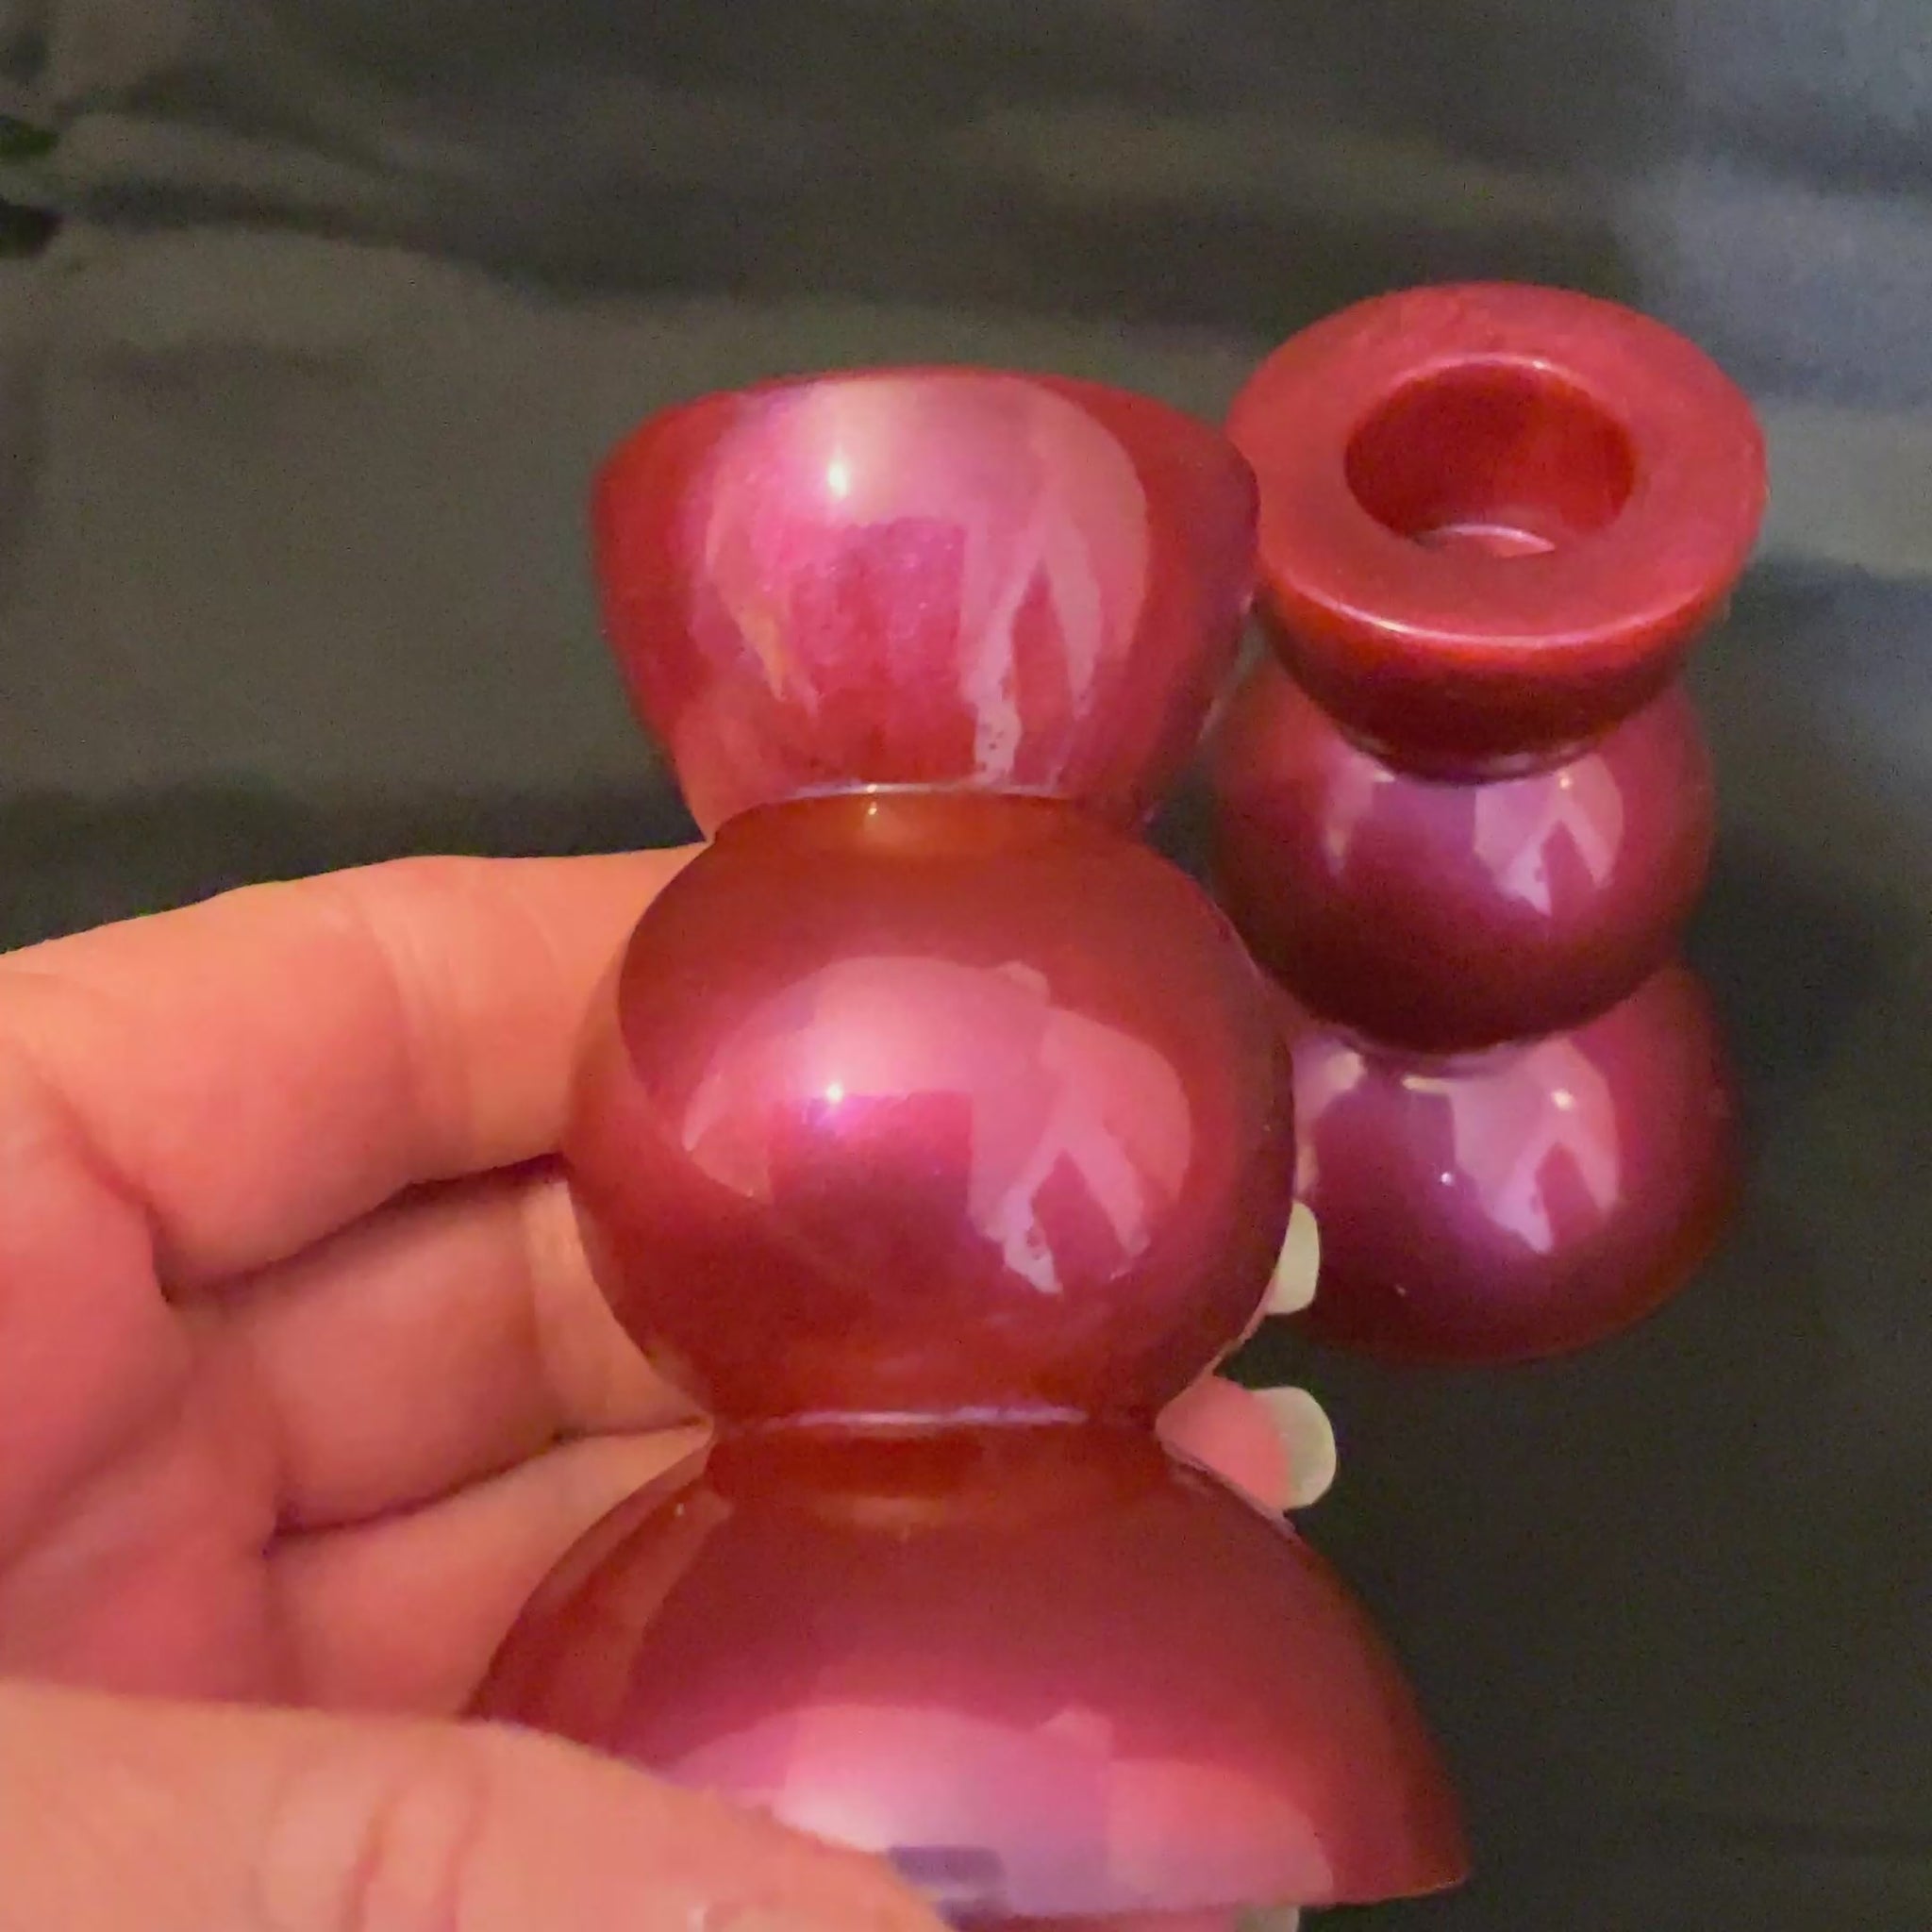 Handmade Pearly Color Shift Sunset Resin Rounded Geometric Candlestick Holders video showing how the different colors of red, orange, pink, and purple flash when moving around in the light.